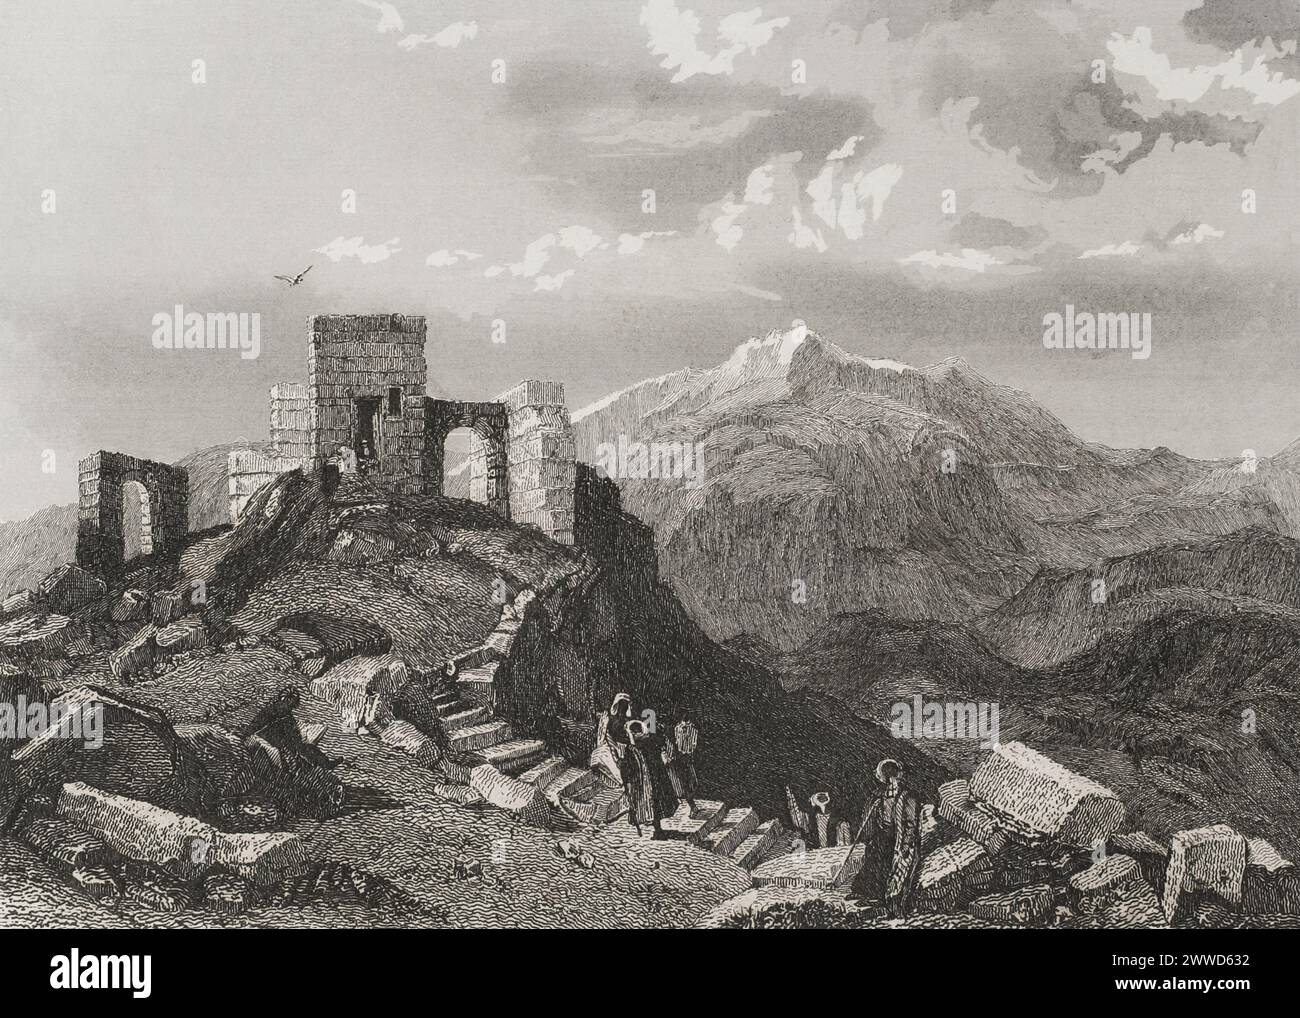 Summit of Mount Sinai. Ruins of a temple. Engraving by Emile Rouargue. 'La Tierra Santa y los lugares recorridos por los profetas, por los apóstoles y por los cruzados' (The Holy Land and the sites traversed by the prophets, by the apostles and by the crusaders). Published in Barcelona by the printing house of Joaquin Verdaguer, 1840. Stock Photo